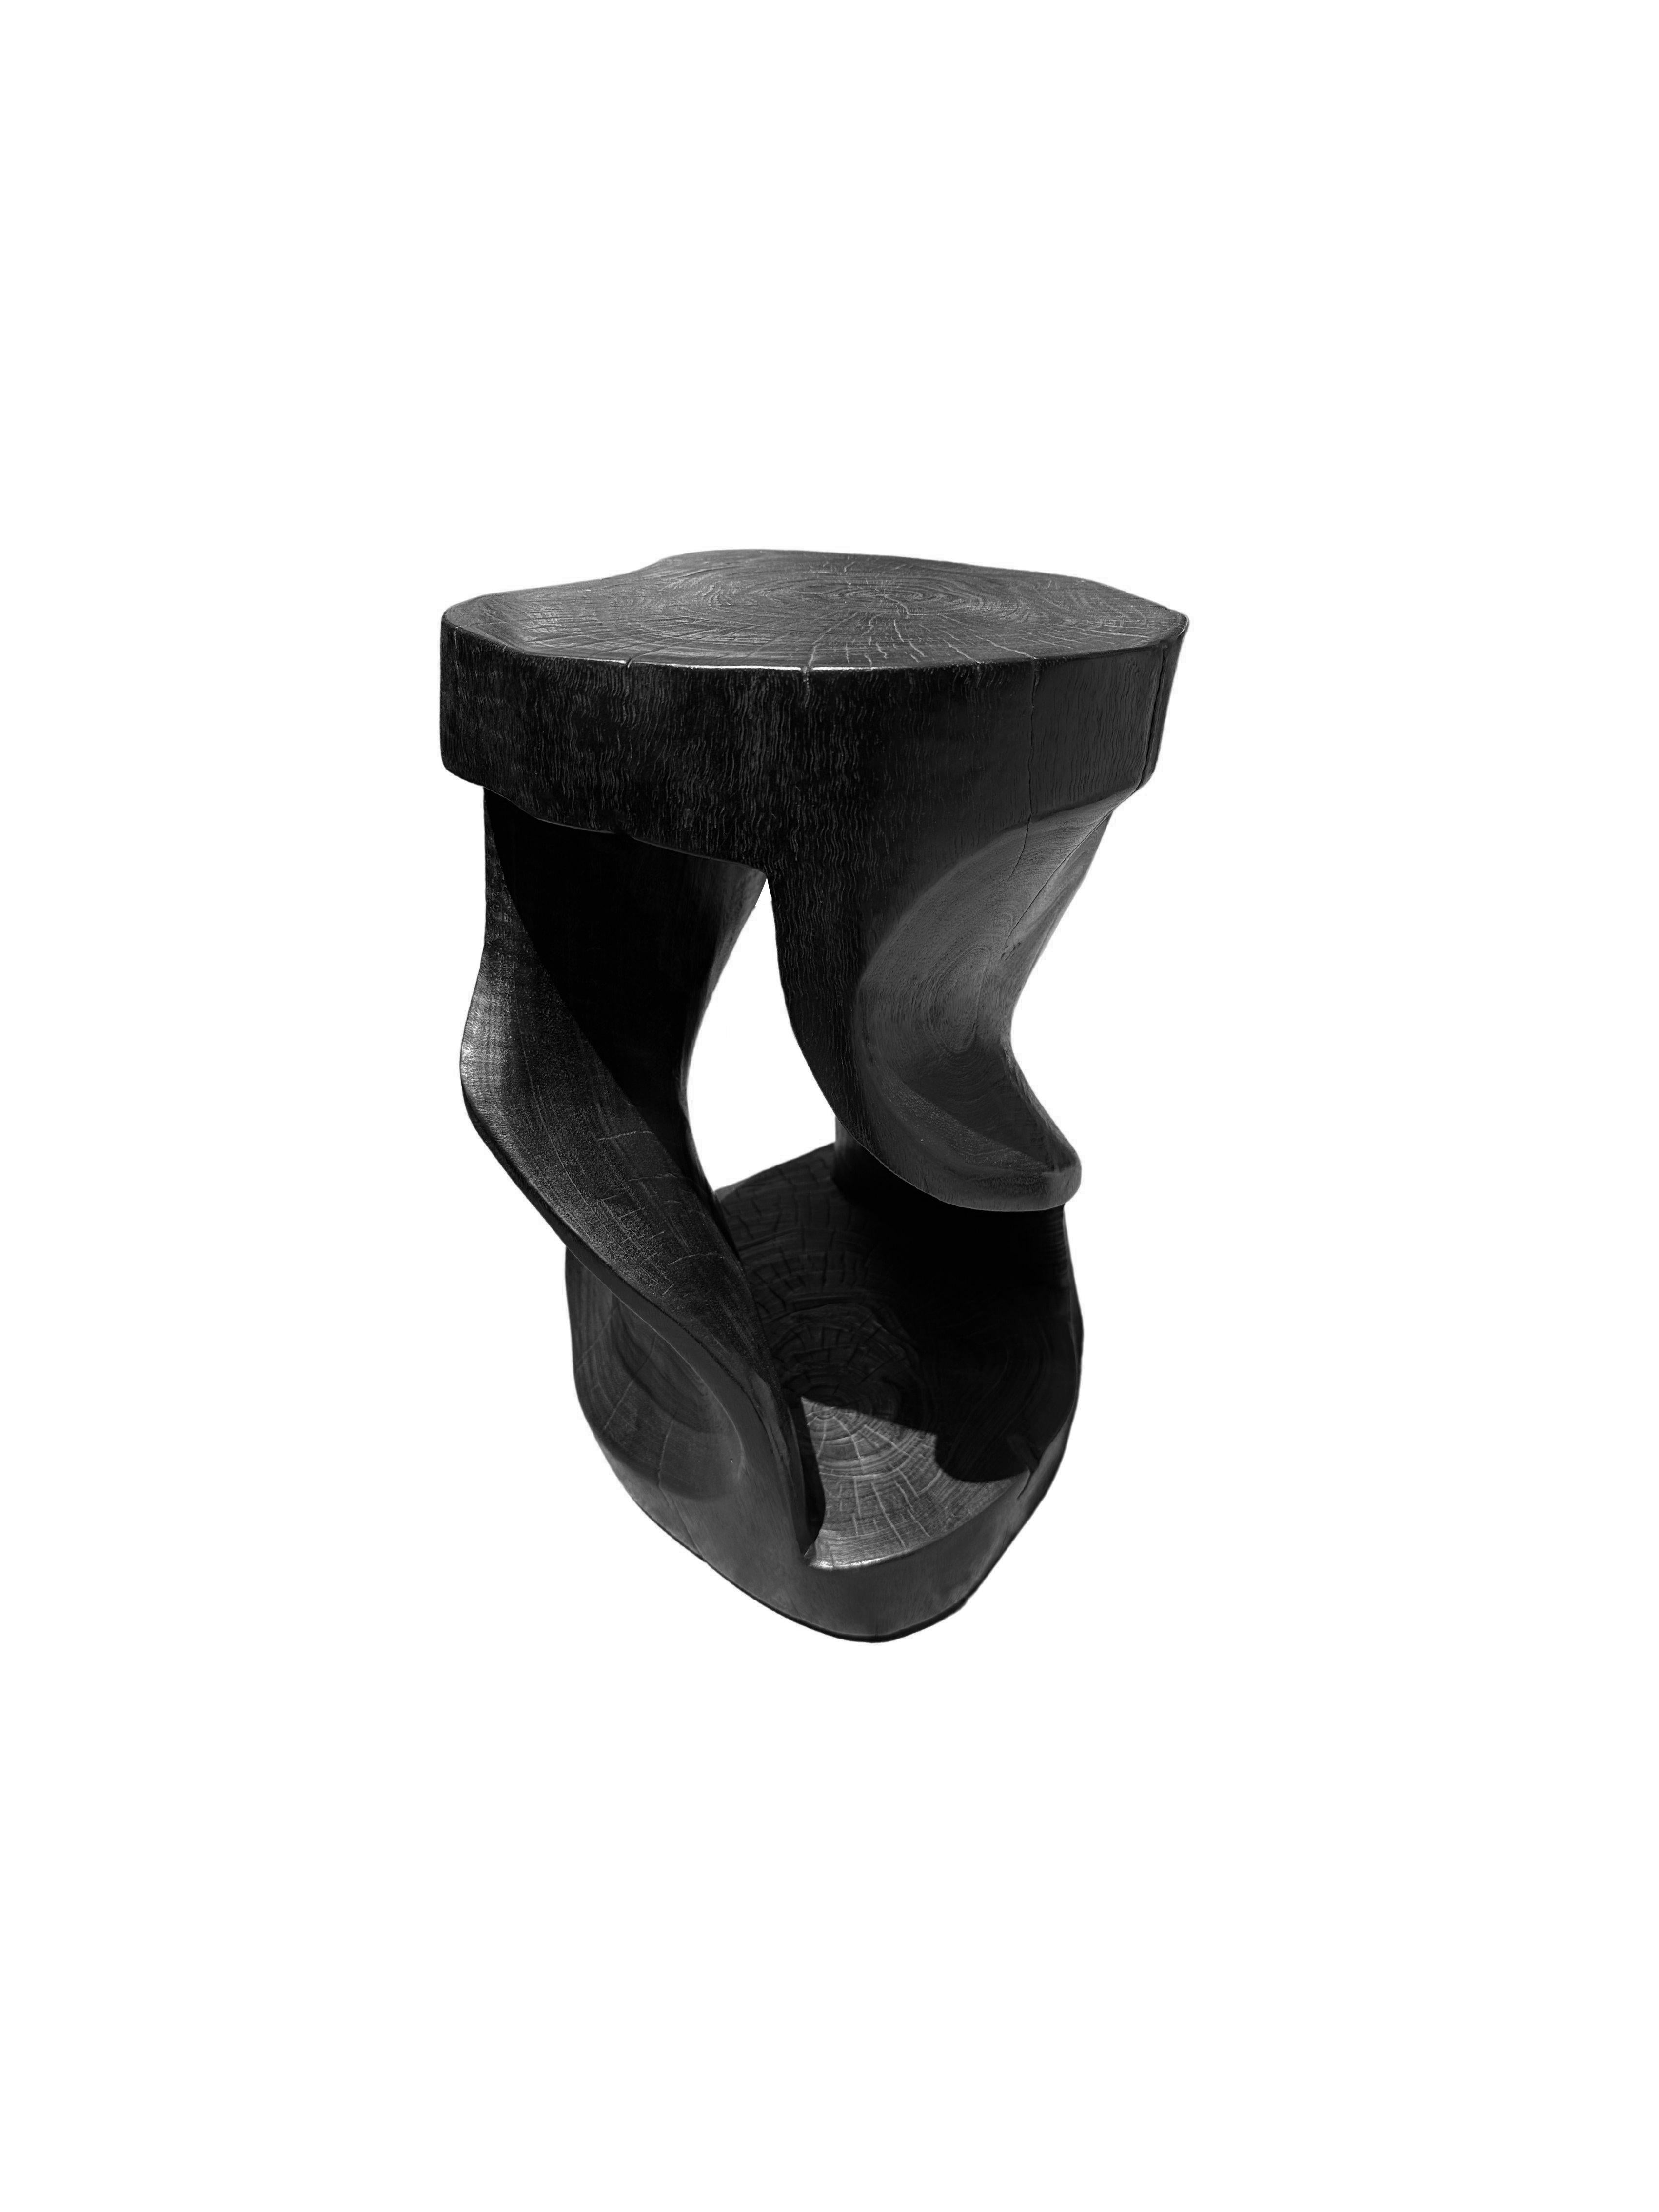 Indonesian Sculptural Stool / Side Table Carved from Solid Mango Wood Modern Organic For Sale